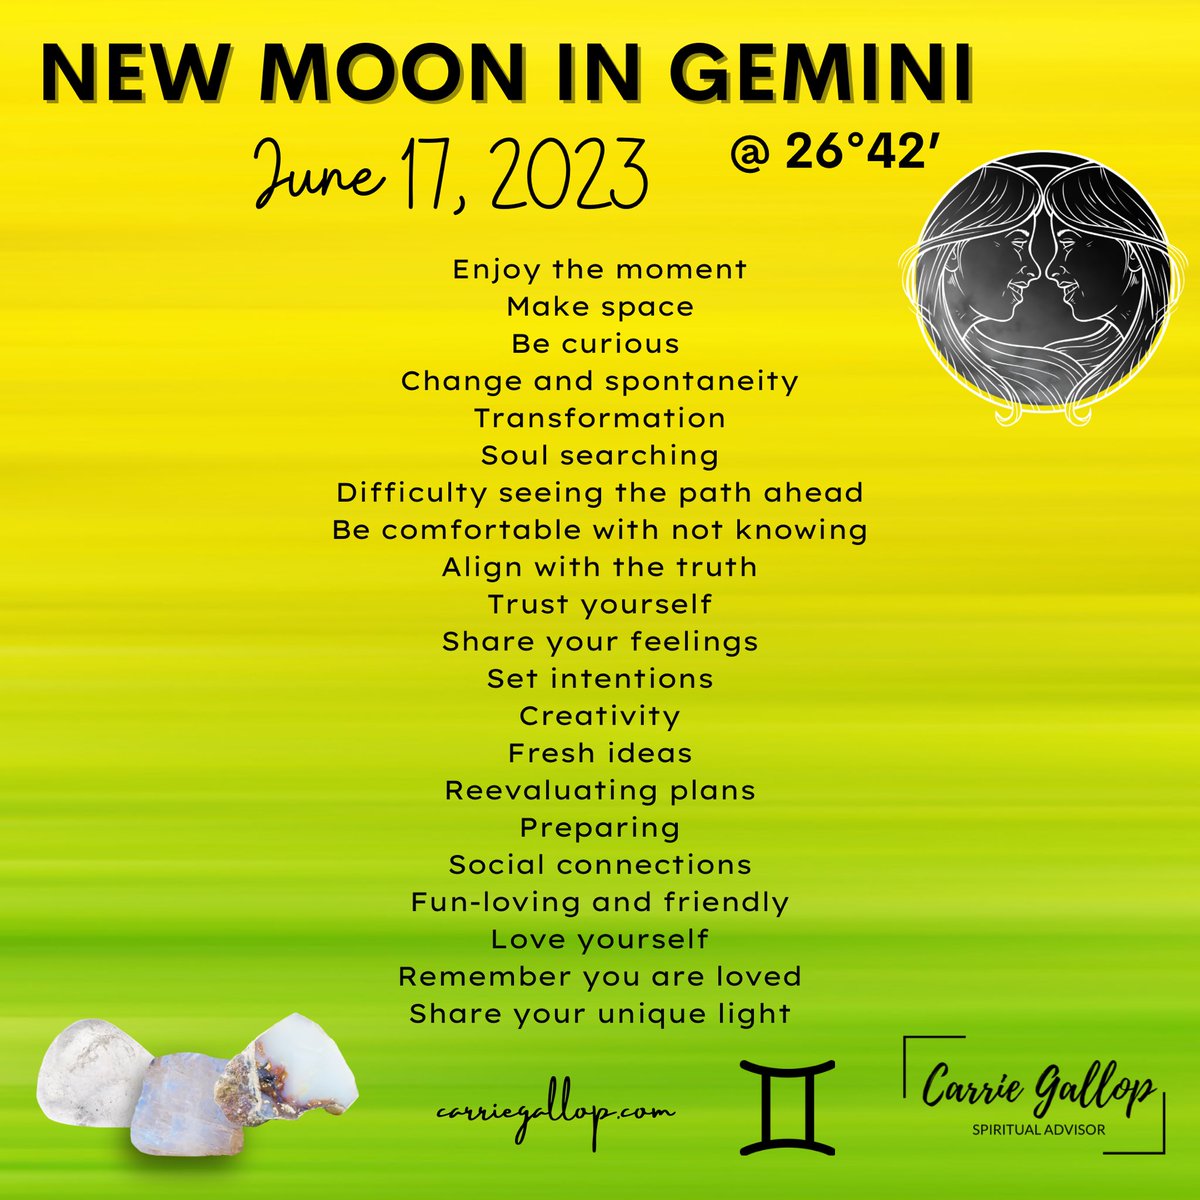 Get out there and live a life you love. Experience the pleasure, abundance, and wonder that life has to offer. Set your intentions to bring in even more greatness and joy.

Have a beautiful New Moon! 🌑👯‍♀️🪞

#NewMoon #Moon #Gemini #Astrology #Energy #Twins #Enjoy #Joy #MakeSpace